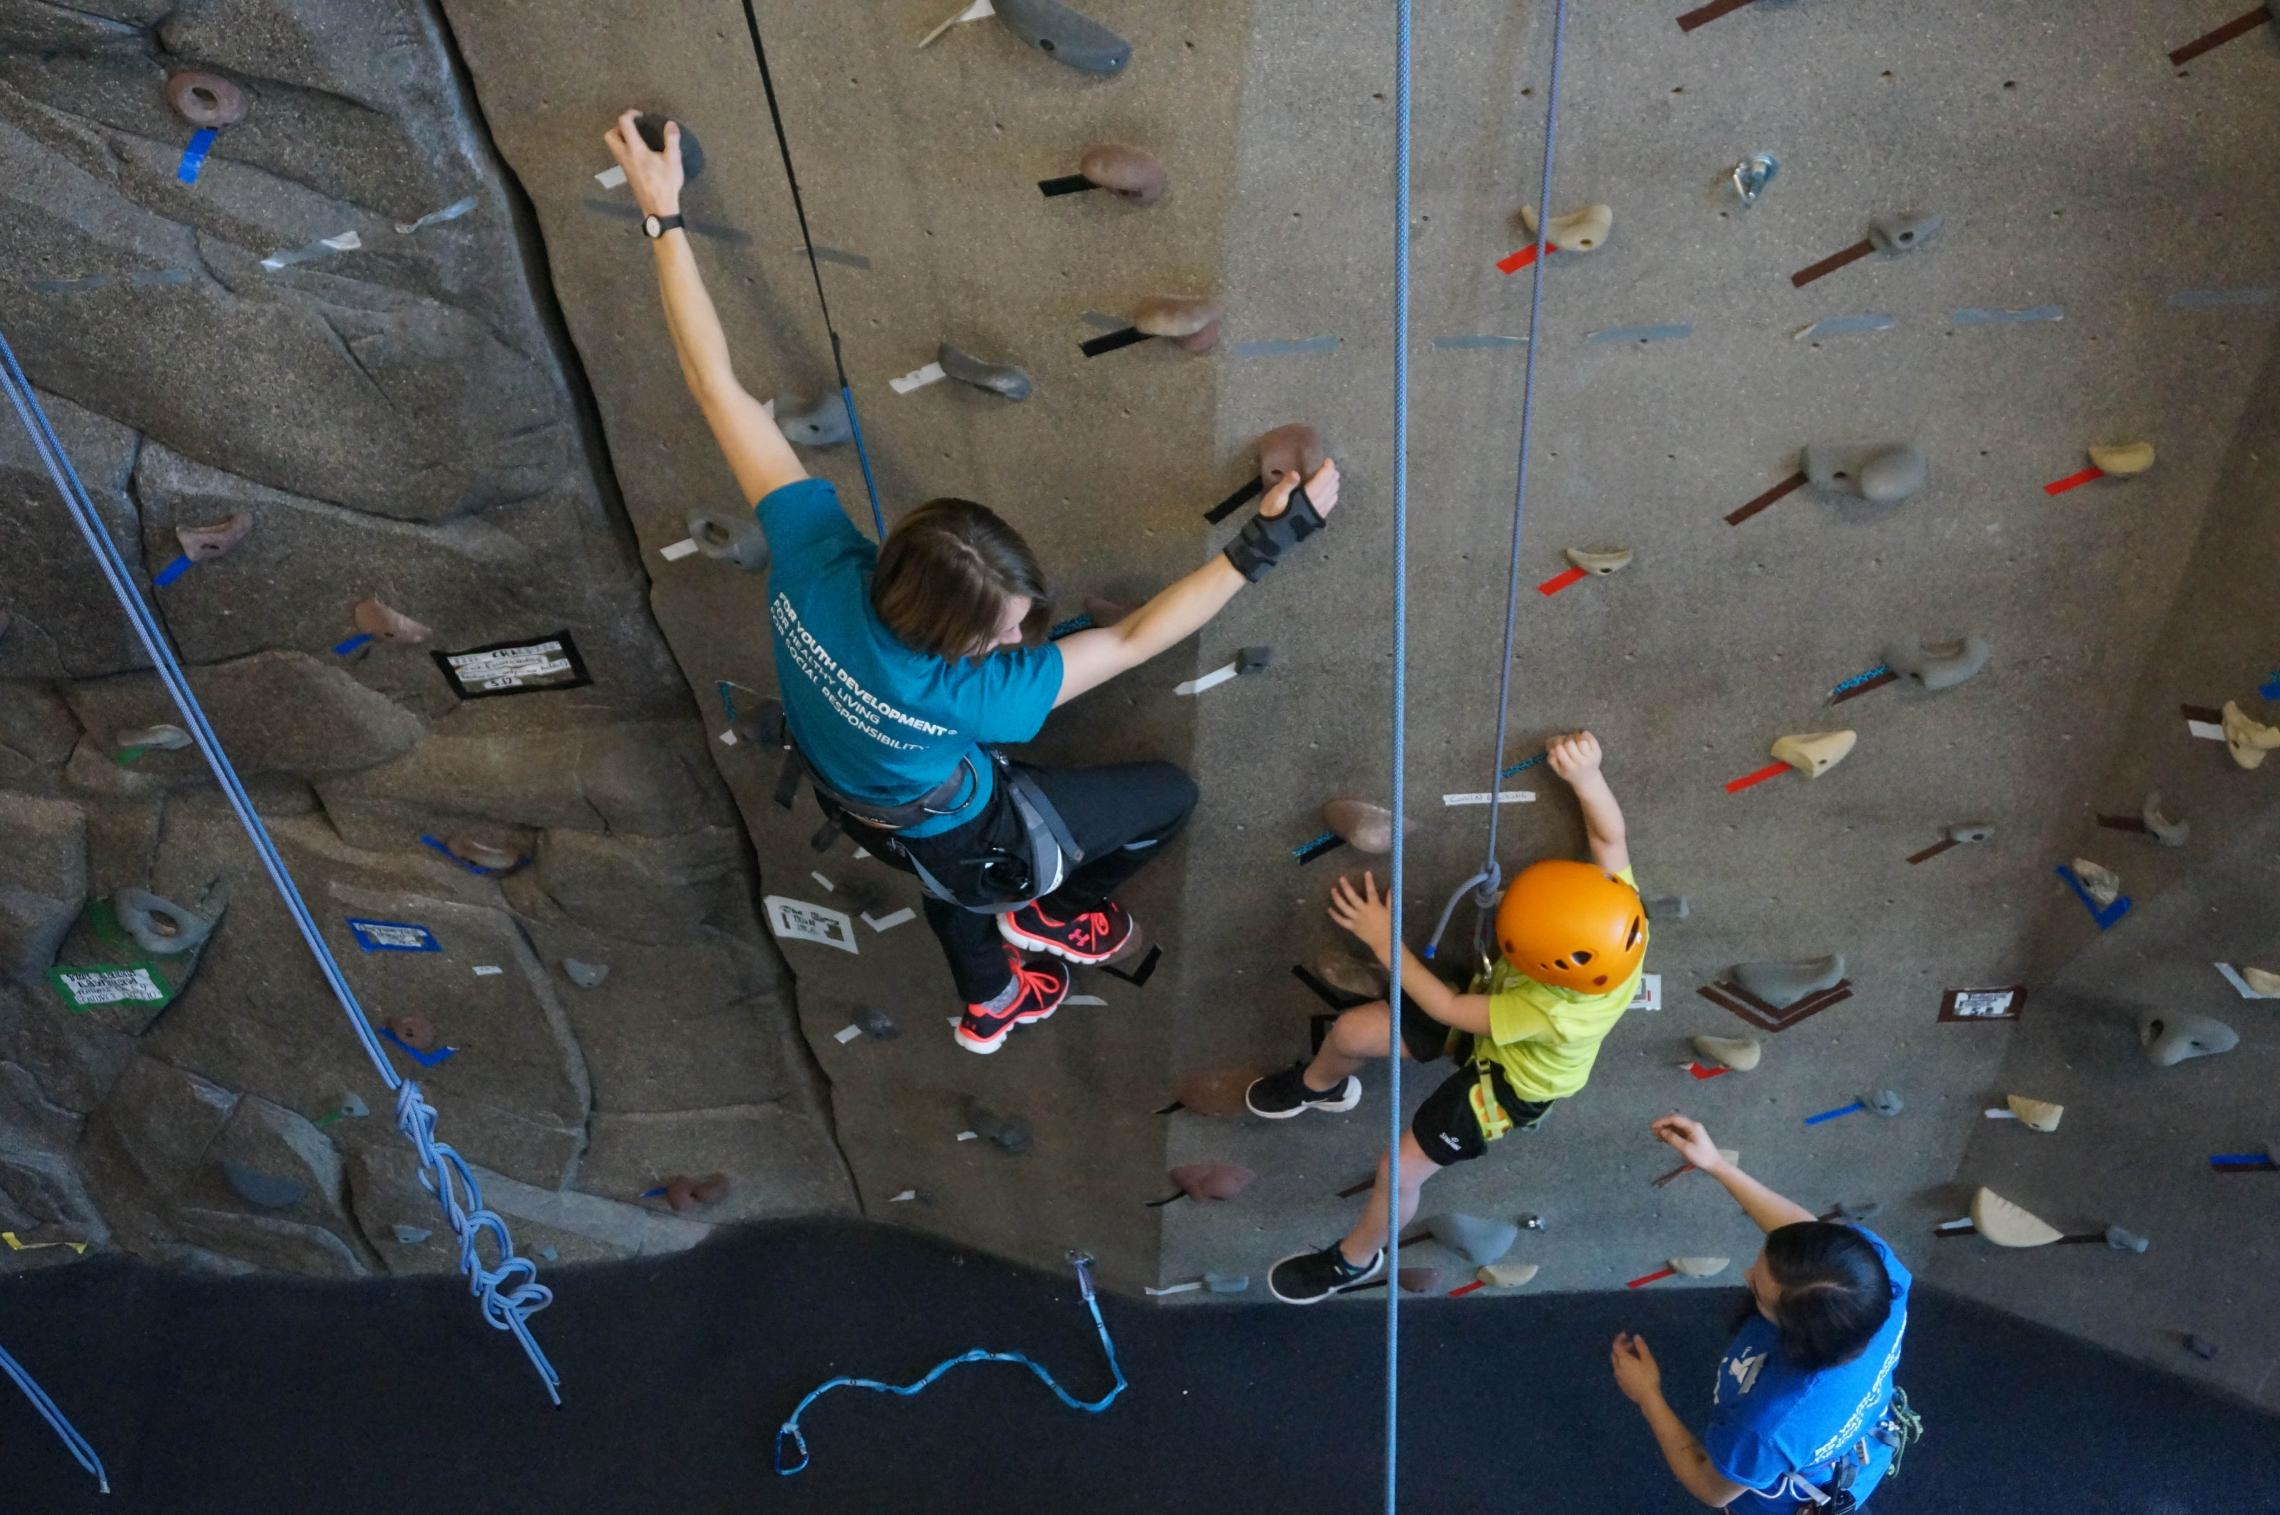 Staff leading winter break camp participant up rock climbing wall route